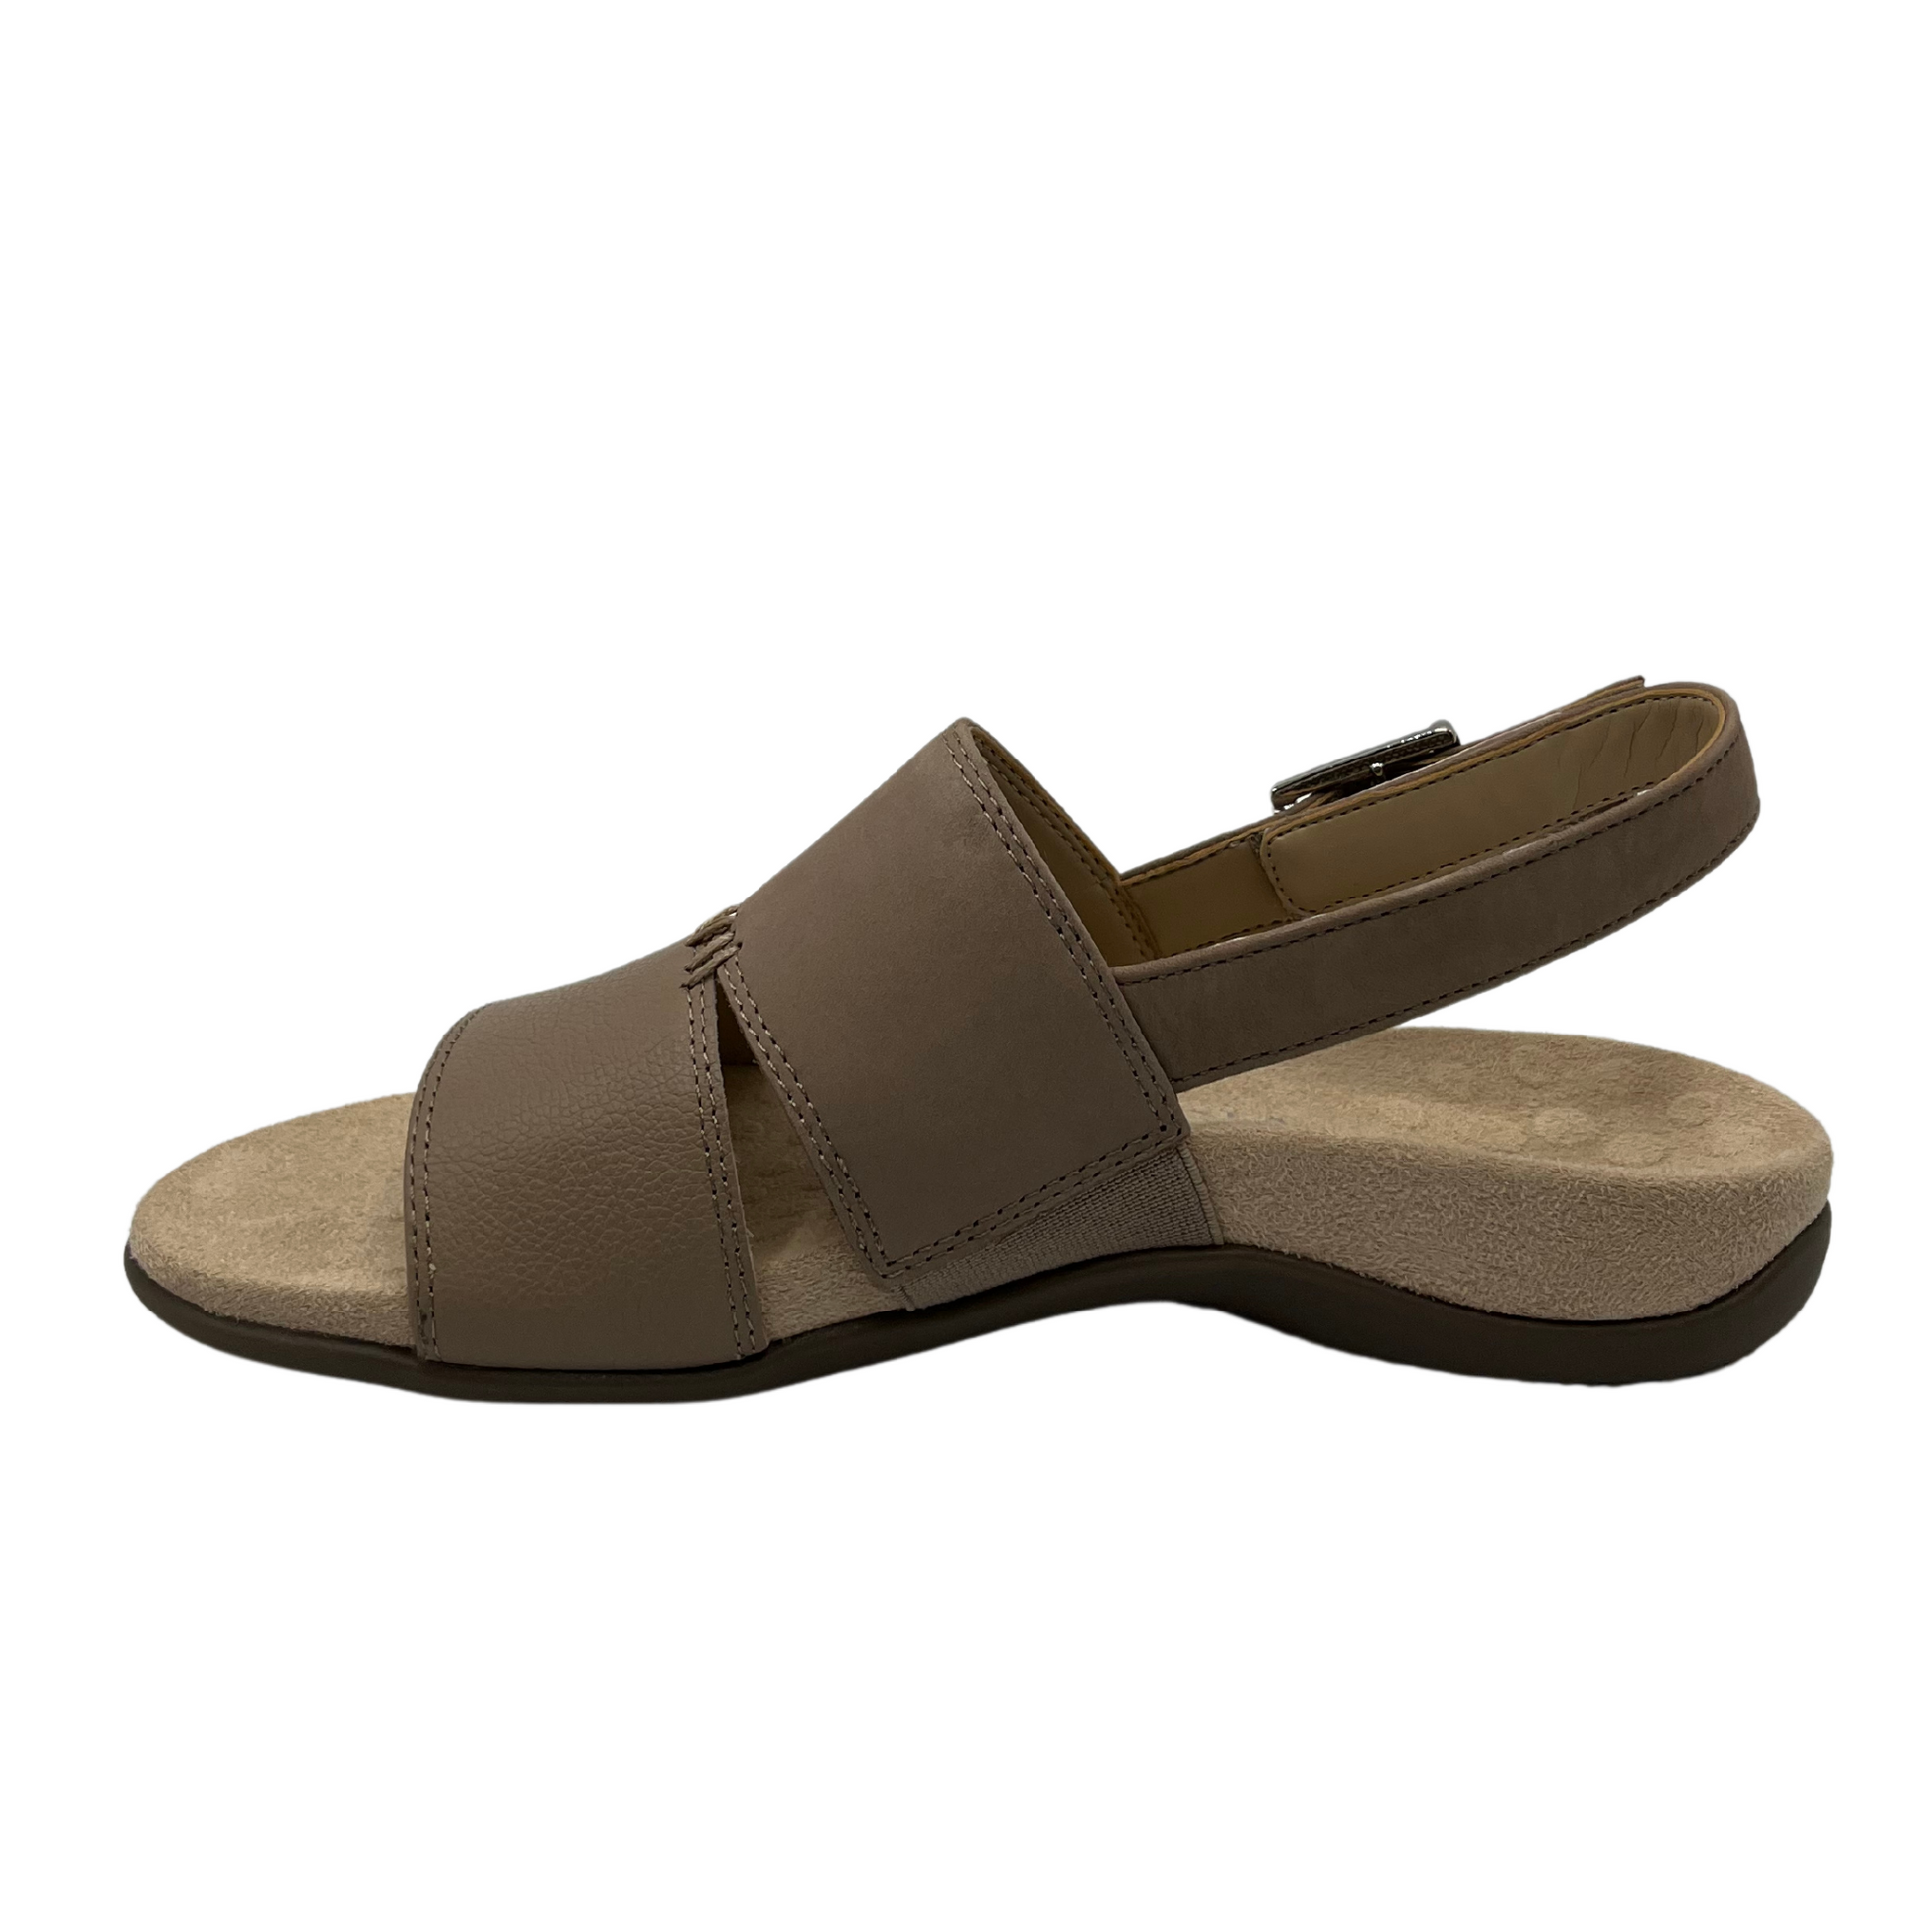 Left facing view of brown leather and nubuck sandal with 1/4 inch heel and slingback strap